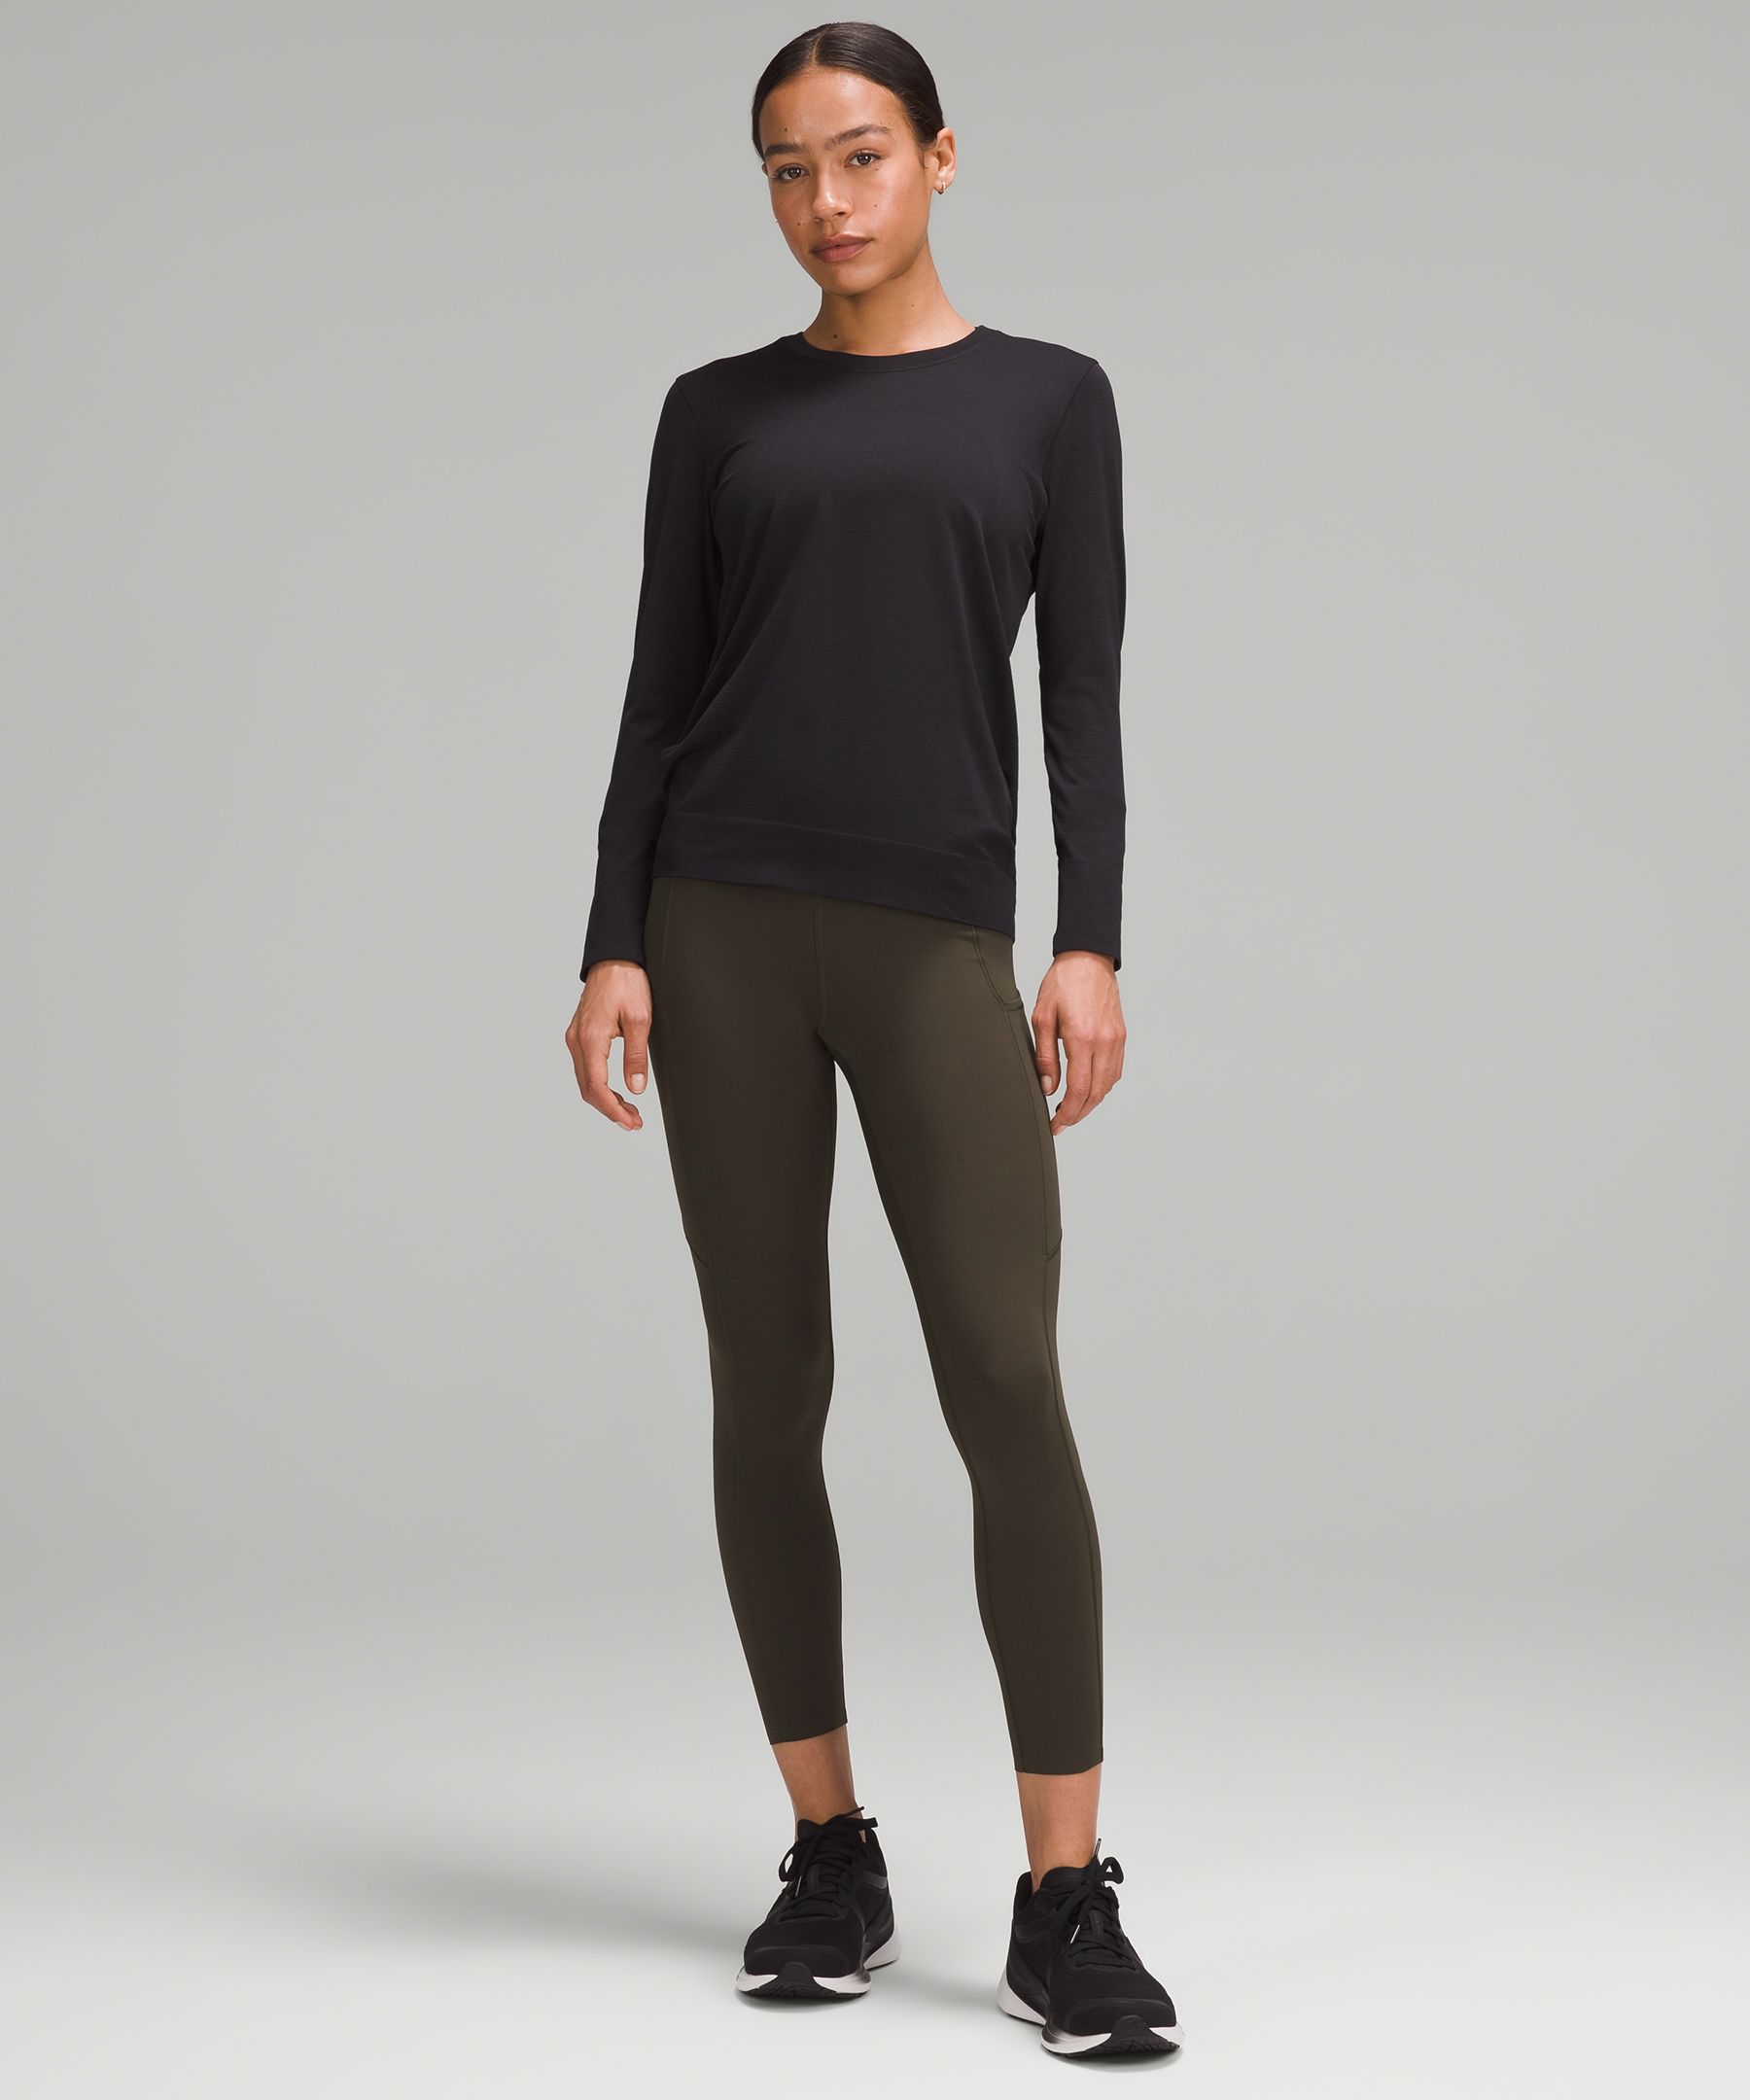 Lululemon InStill High-Rise Tight 25 - Size 14 - Ancient Copper - RP £108